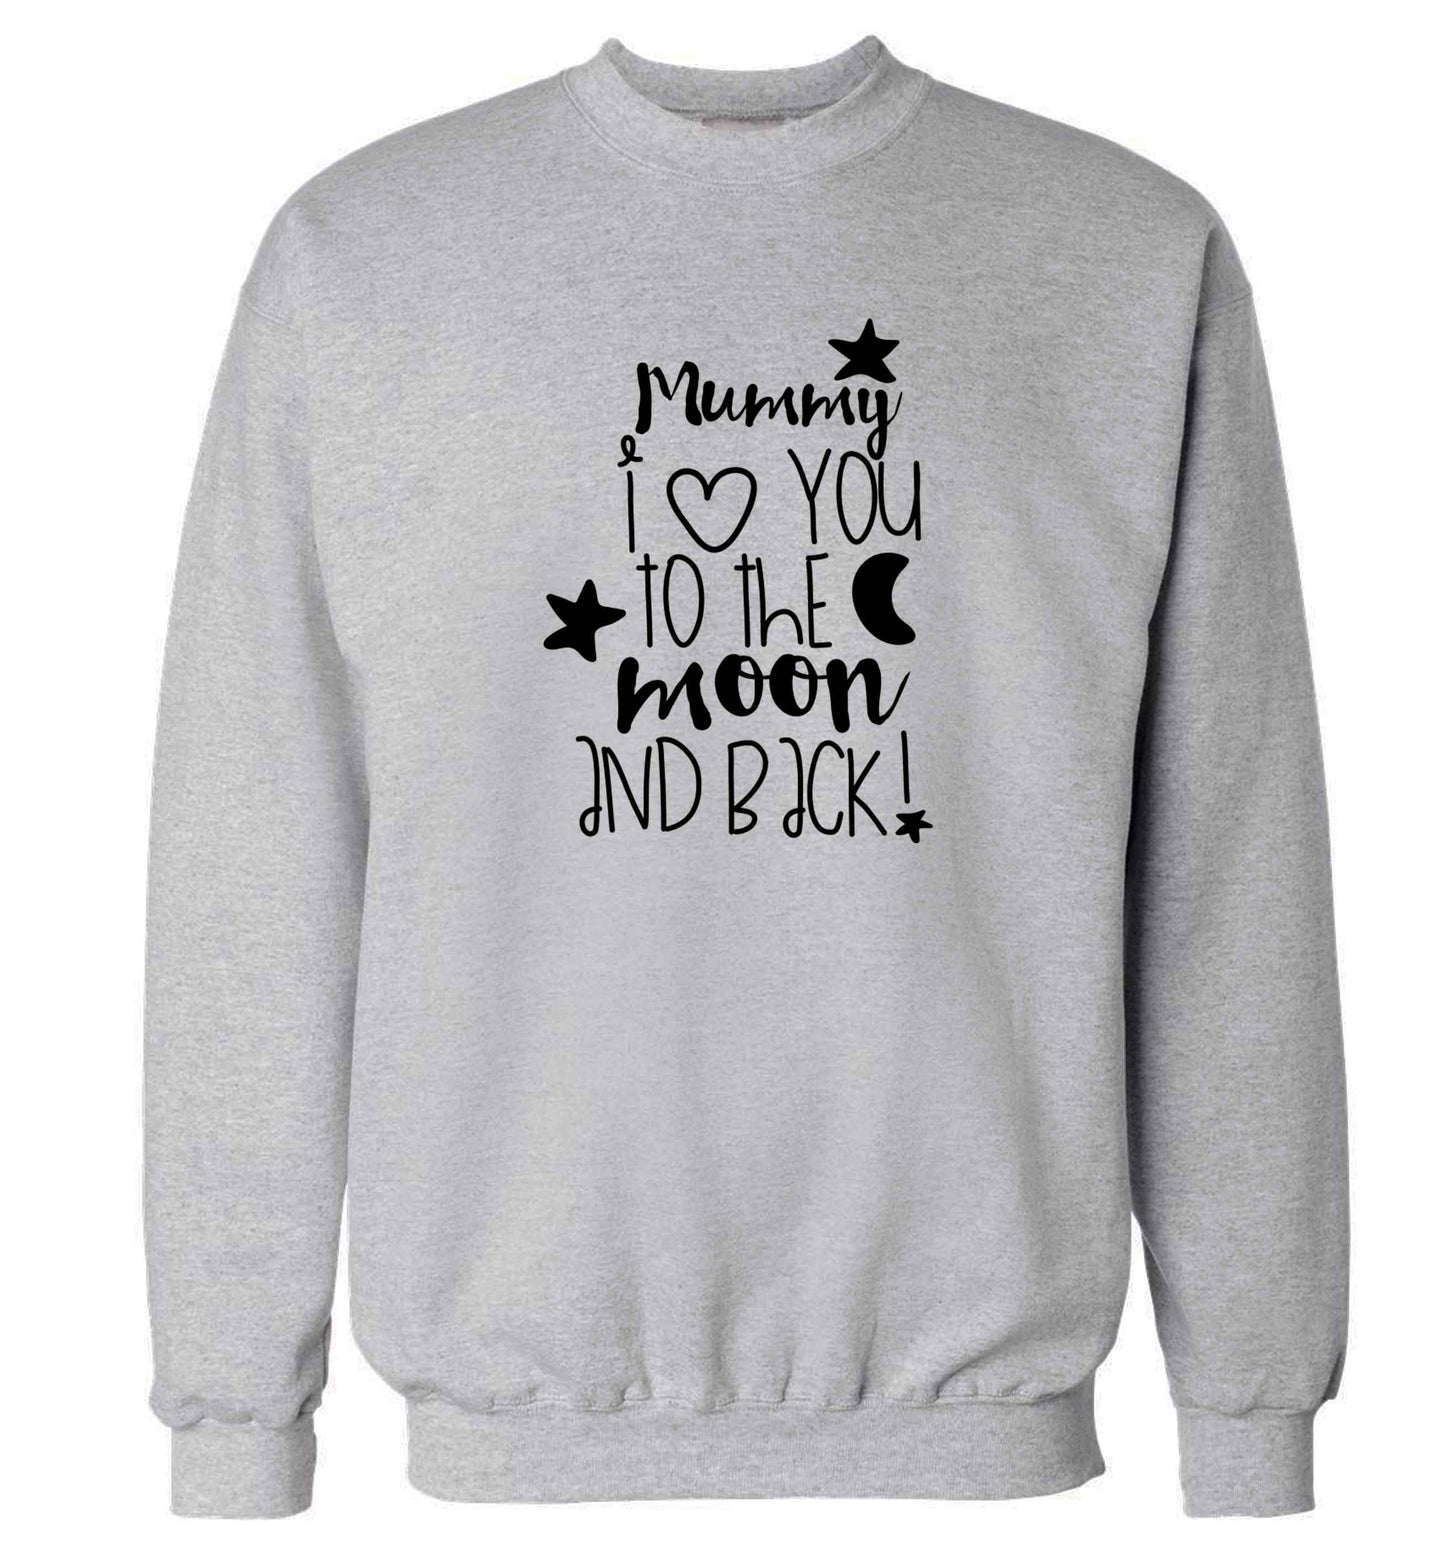 Mummy I love you to the moon and back adult's unisex grey sweater 2XL